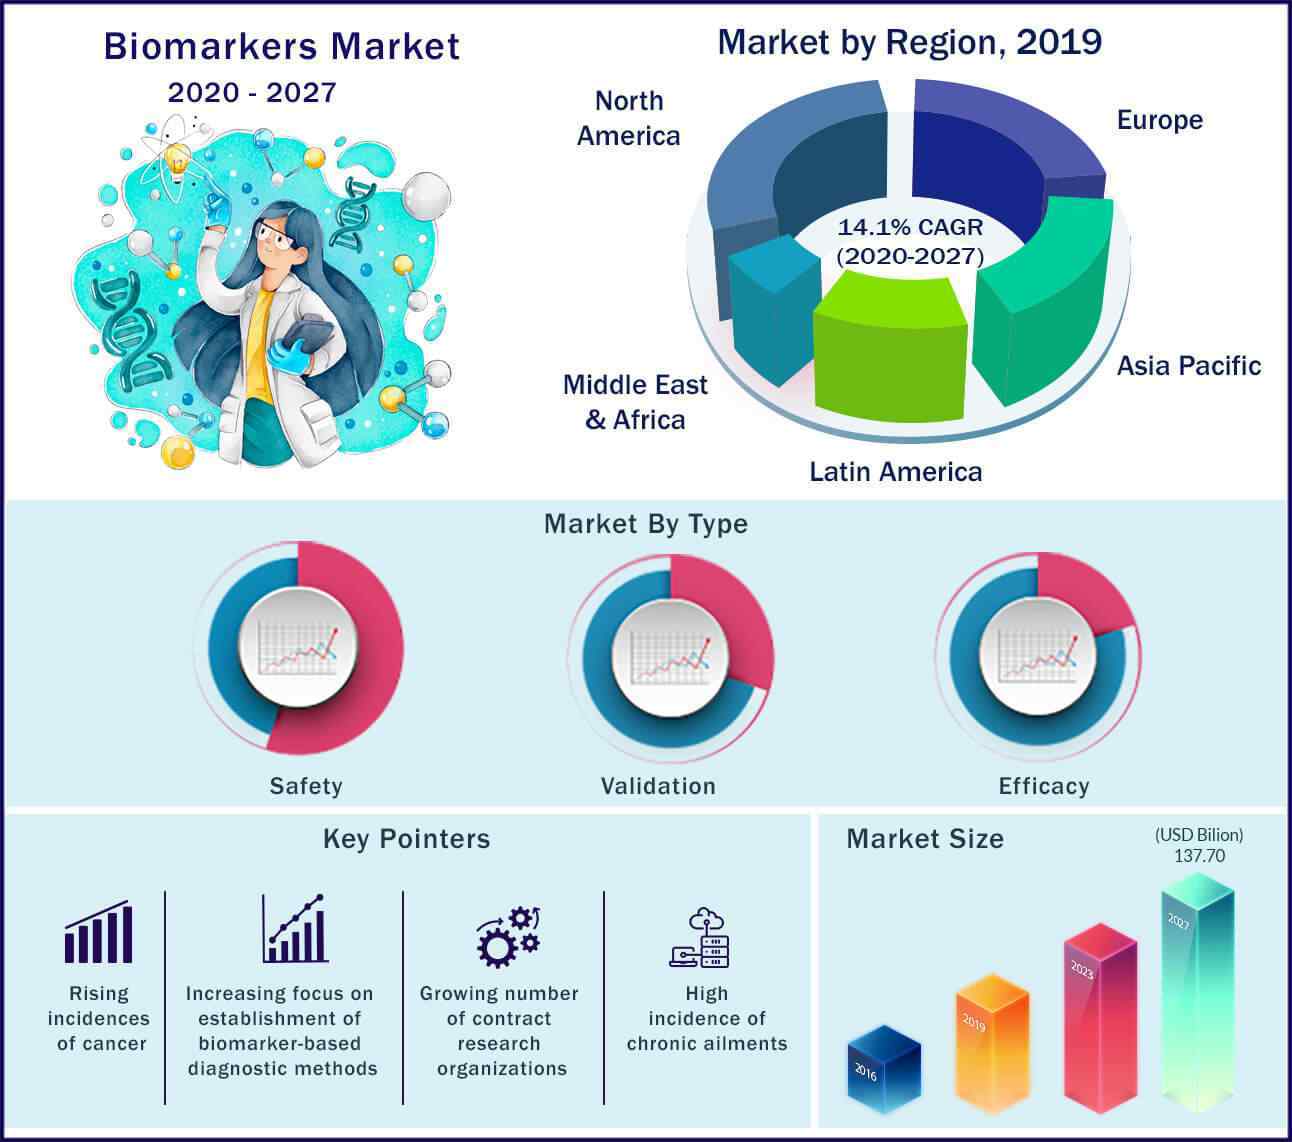 Global Biomarkers Market 2020 to 2027